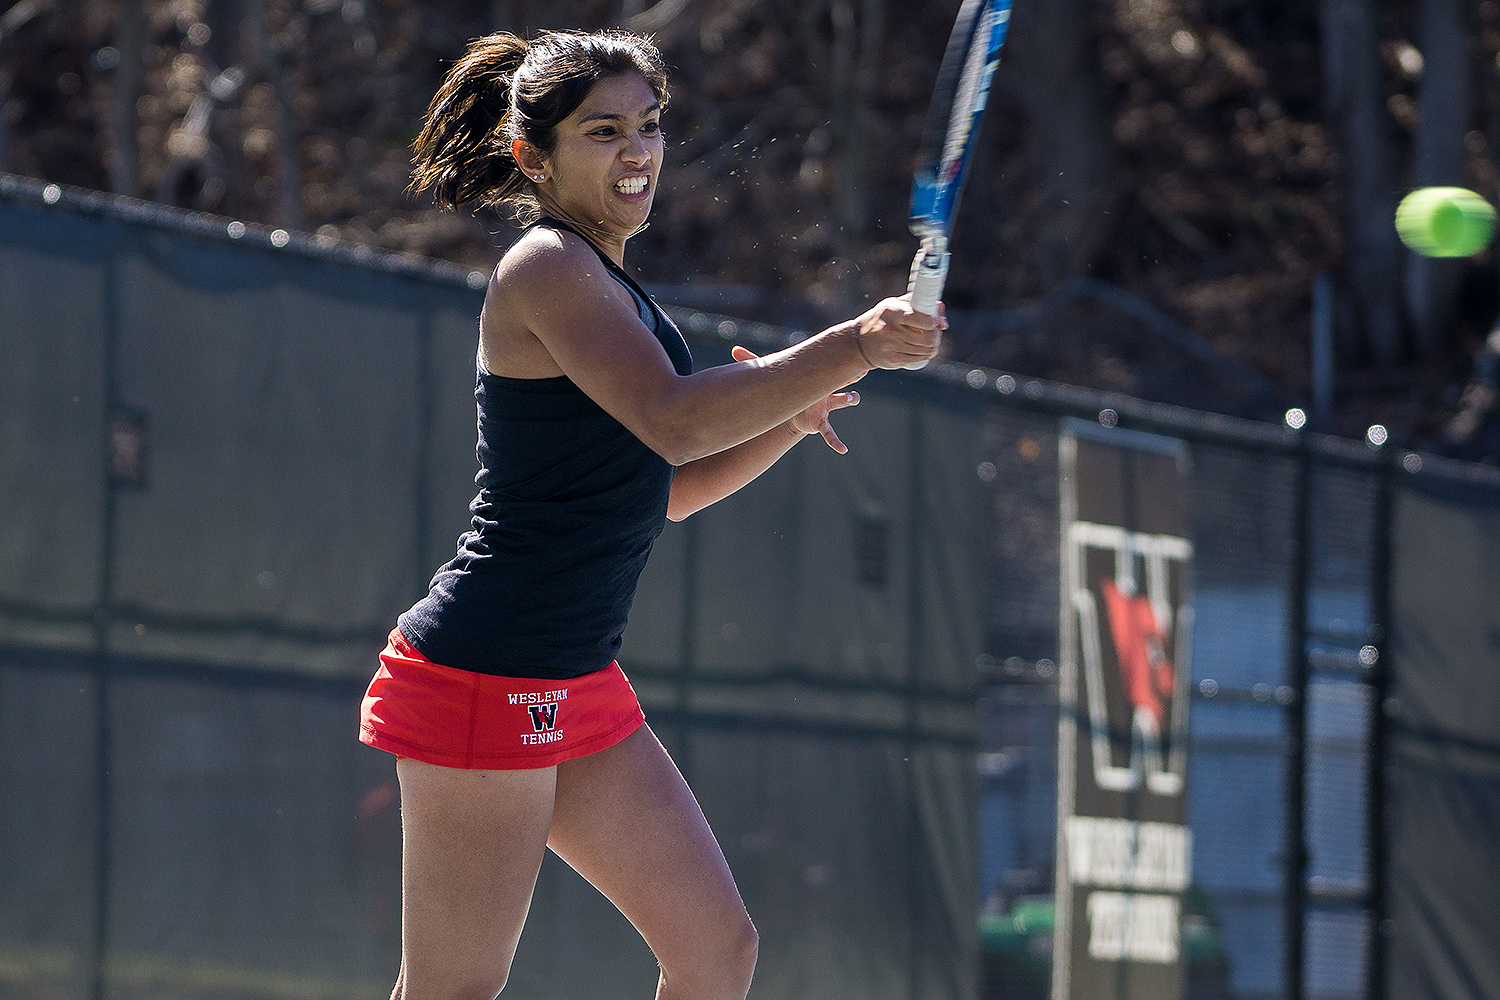 Aashli Budhiraja '18, pictured here playing an opponent from Williams, was one of six women tennis players to be named a Division III Scholar Athlete by the Intercollegiate Tennis Association.